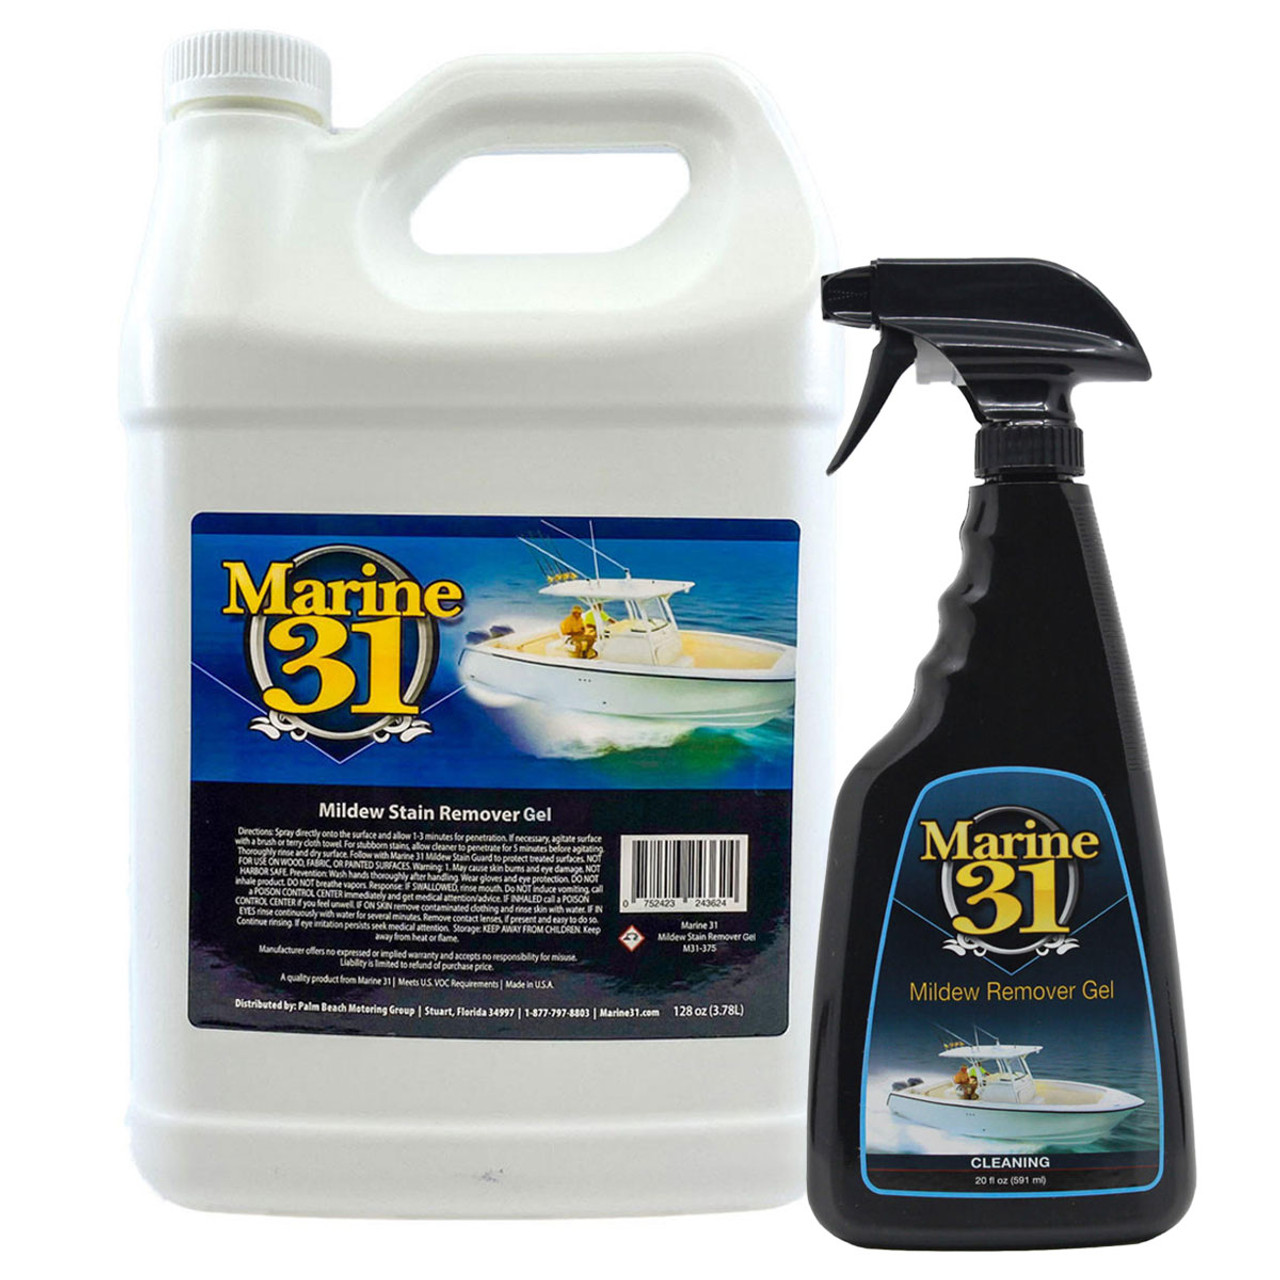 How to Clean and Remove Mildew with the Marine 31 Mildew Remover